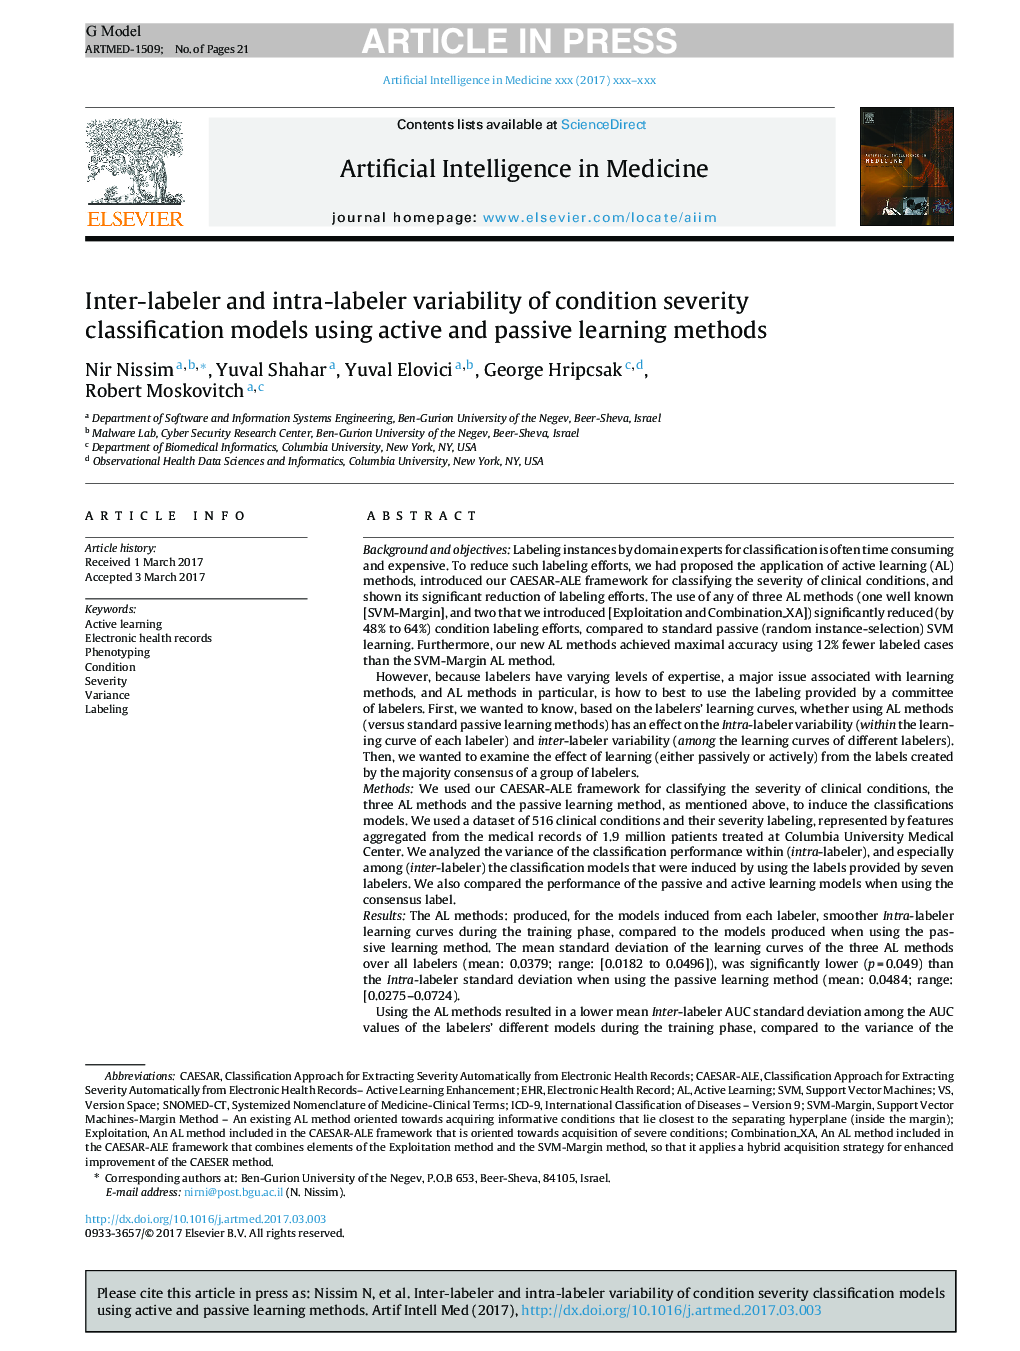 Inter-labeler and intra-labeler variability of condition severity classification models using active and passive learning methods